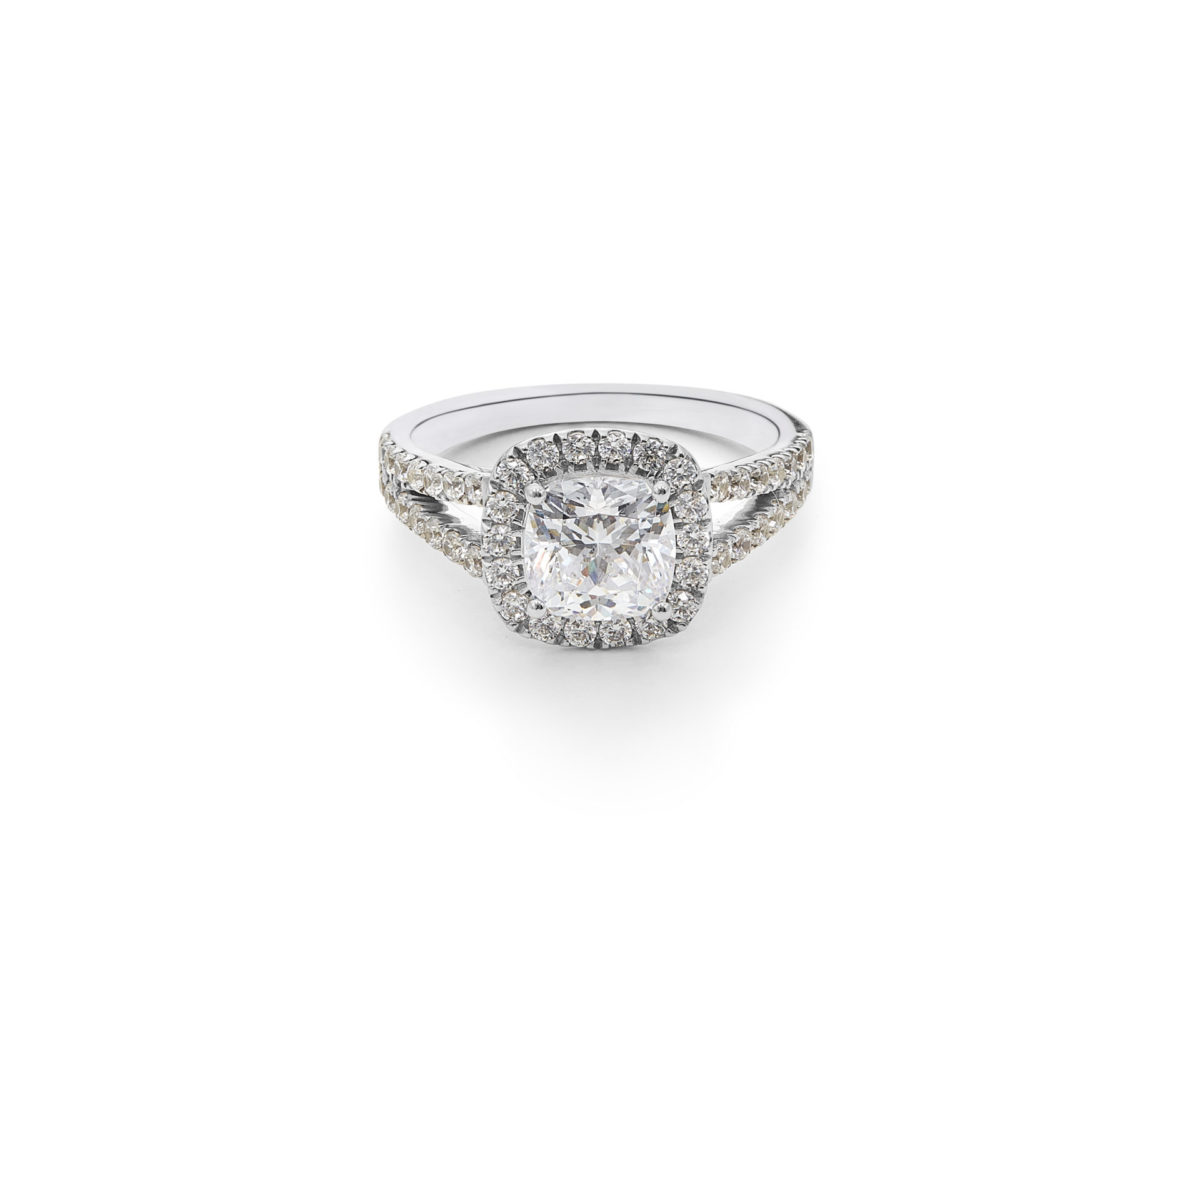 Keepers Collection Clara Engagement Ring - Halo Set Cushion Cut Diamond with Pave Diamond Split Shoulders